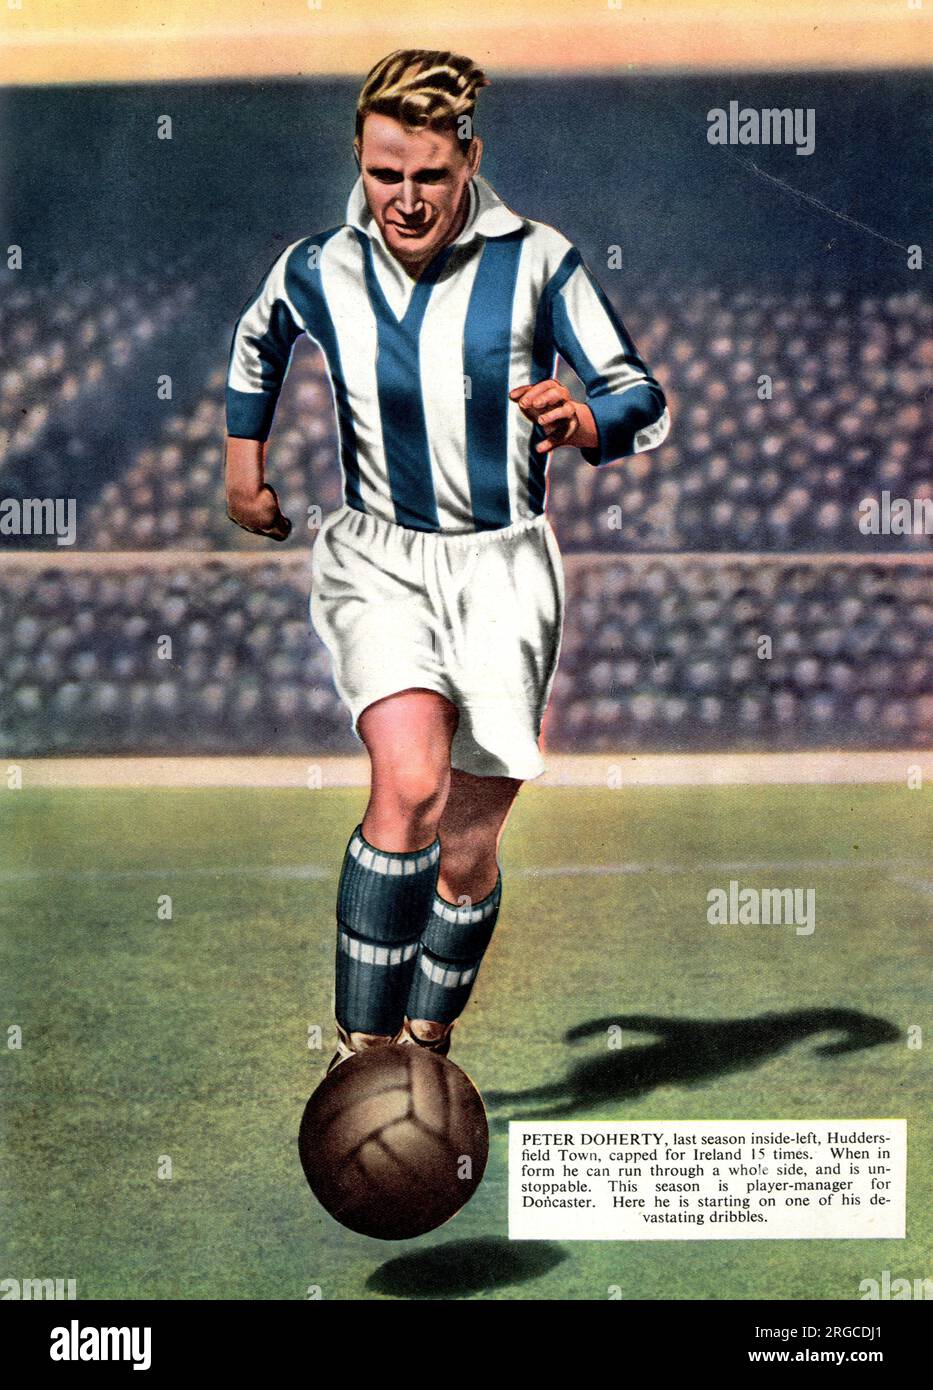 Peter Doherty, inside left footballer for Huddersfield Town and Ireland Stock Photo